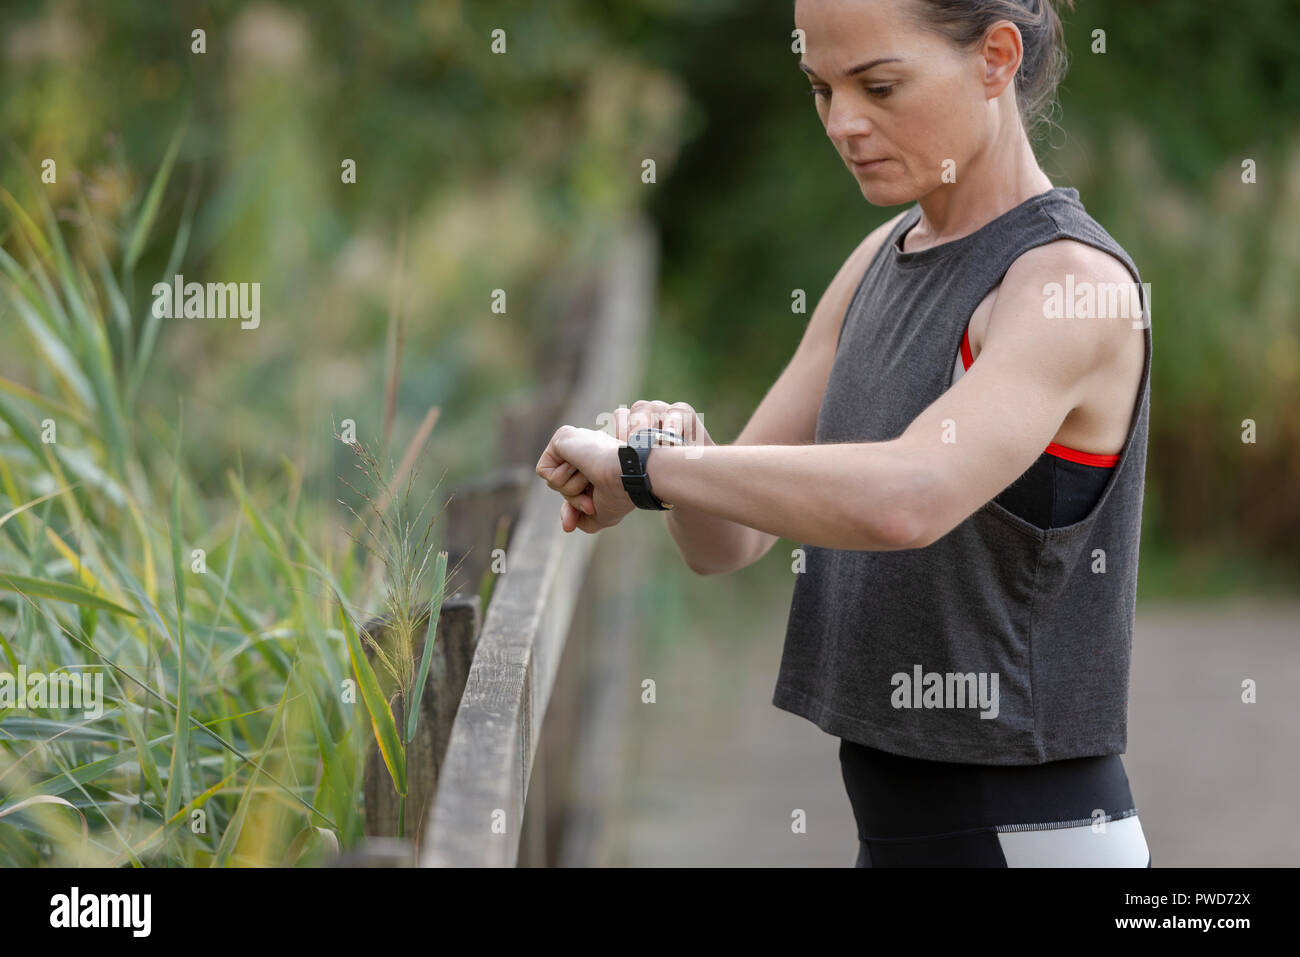 sporty woman checking her fitness tracker 'fit bit' on her wrist Stock Photo